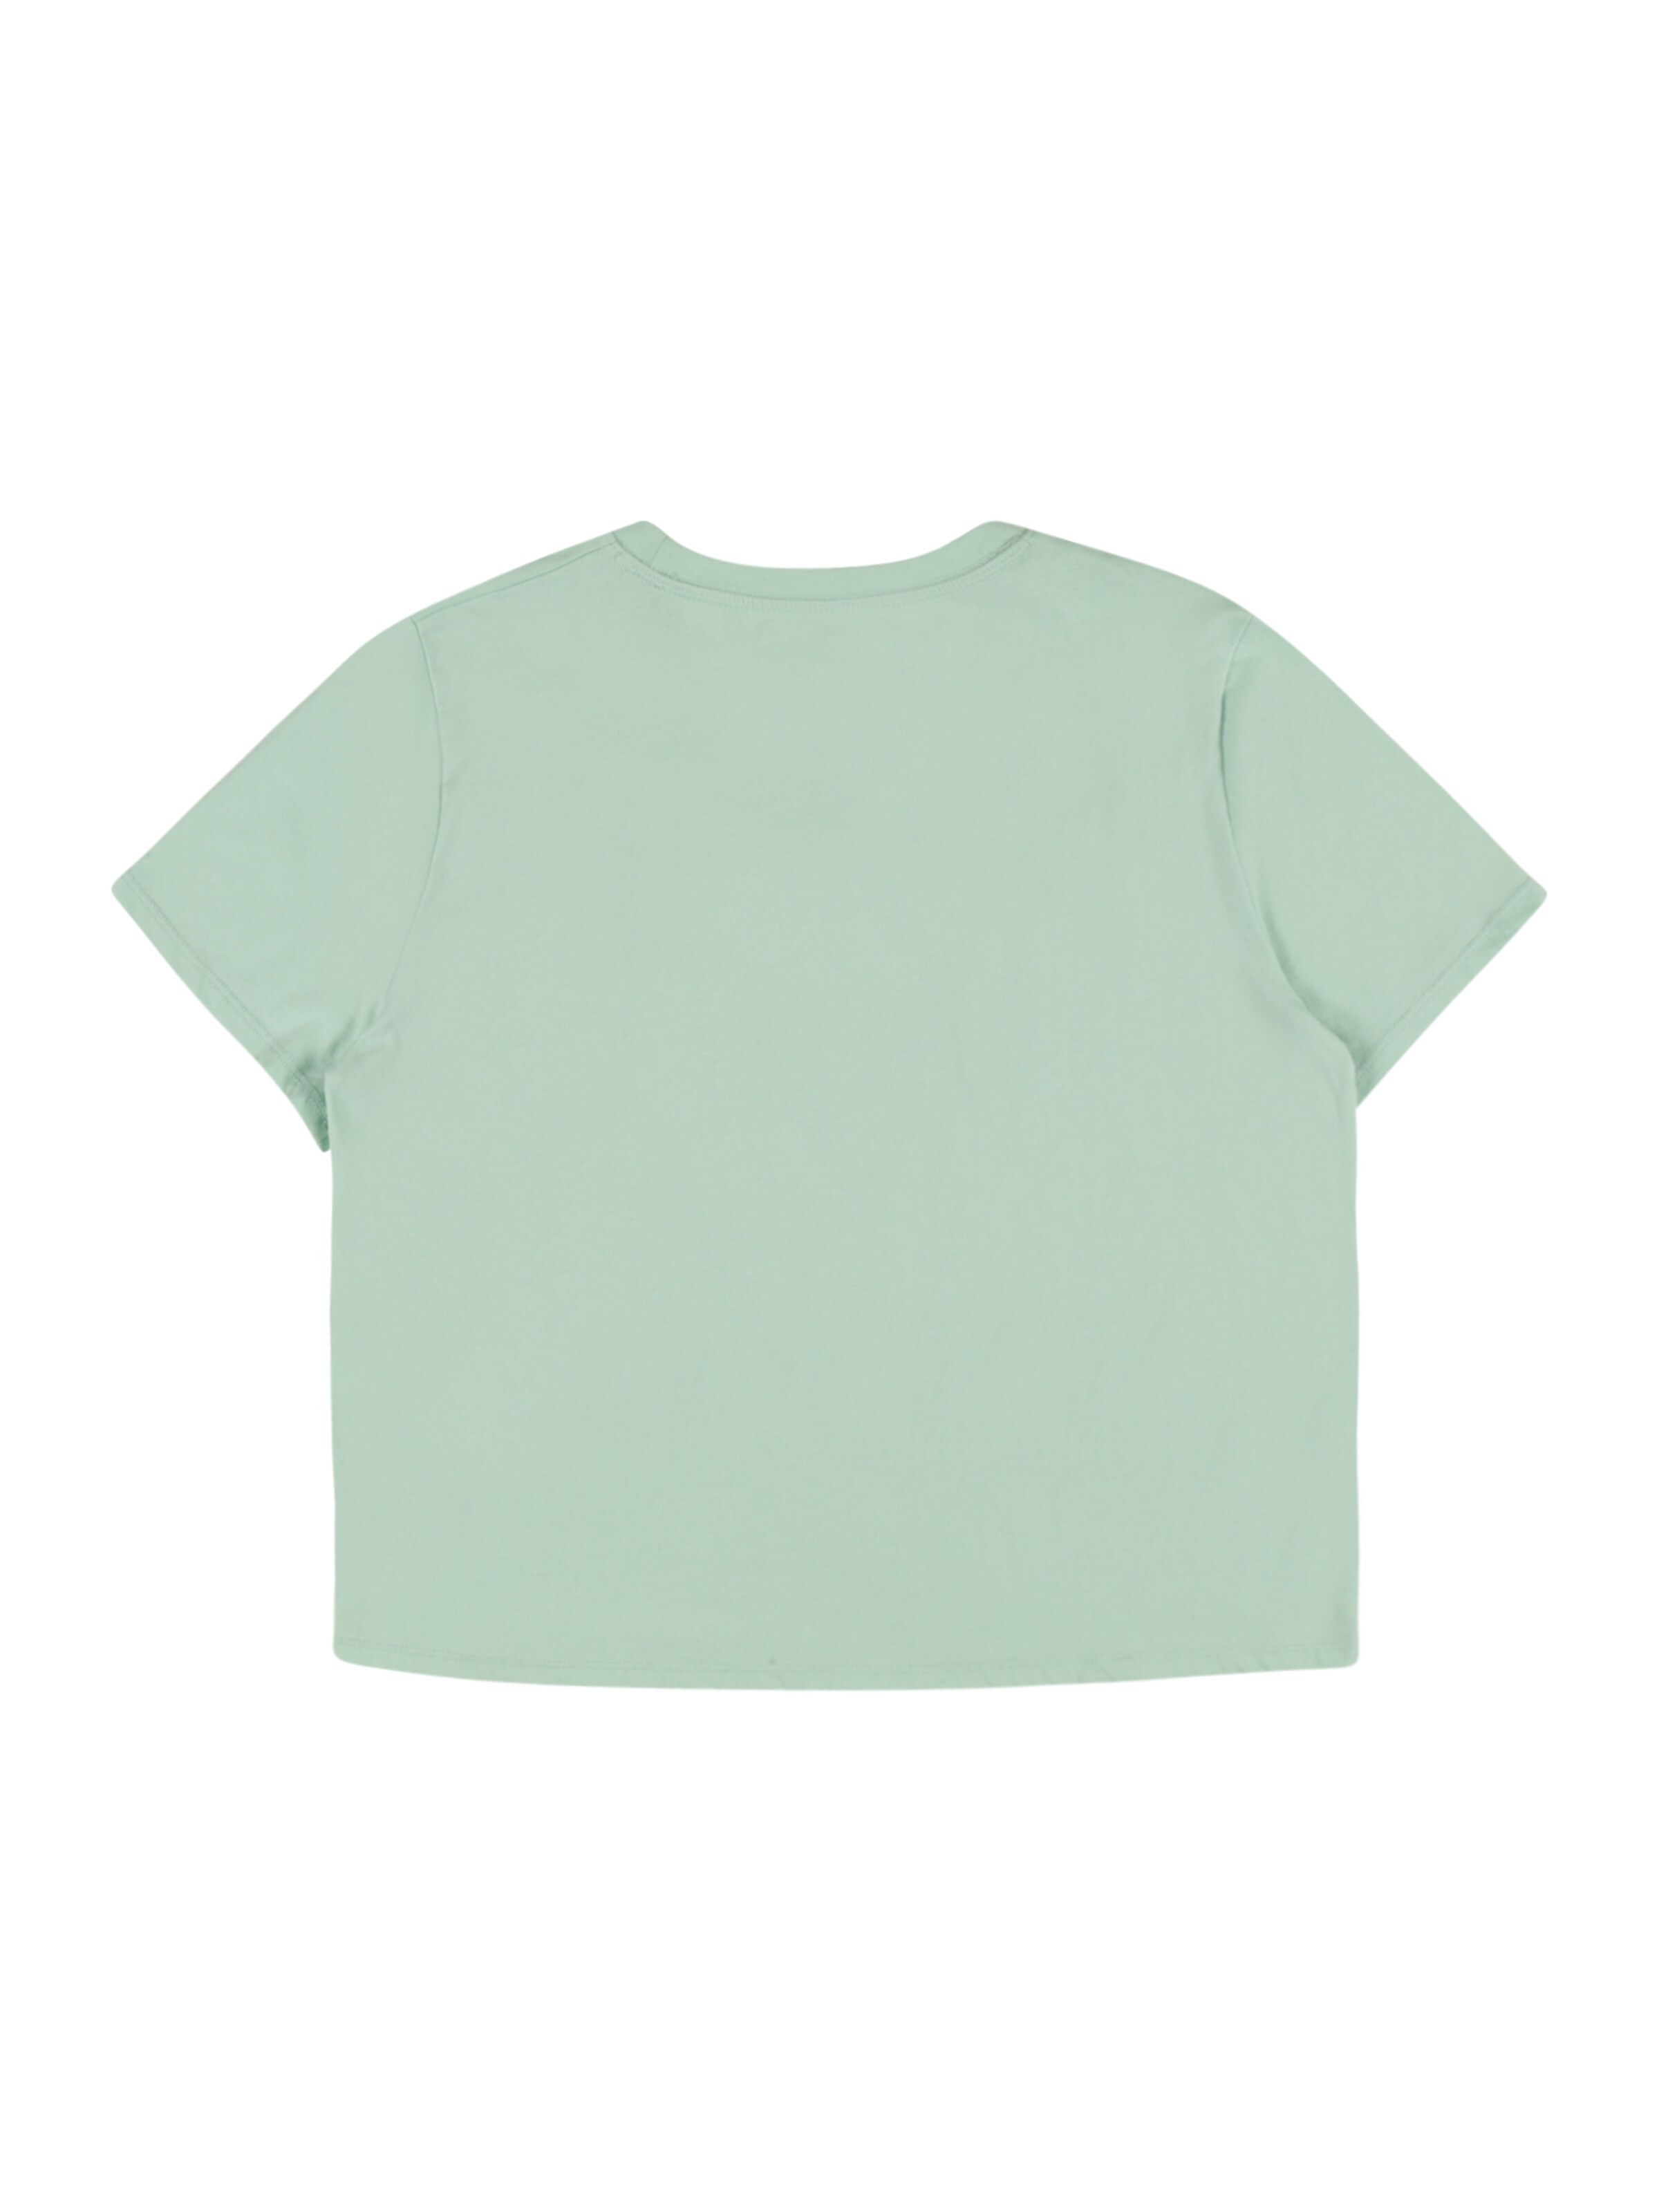 Kinder Teens (Gr. 140-176) Abercrombie & Fitch Shirt 'READY FOR PLAY' in Pastellgrün - CG56439